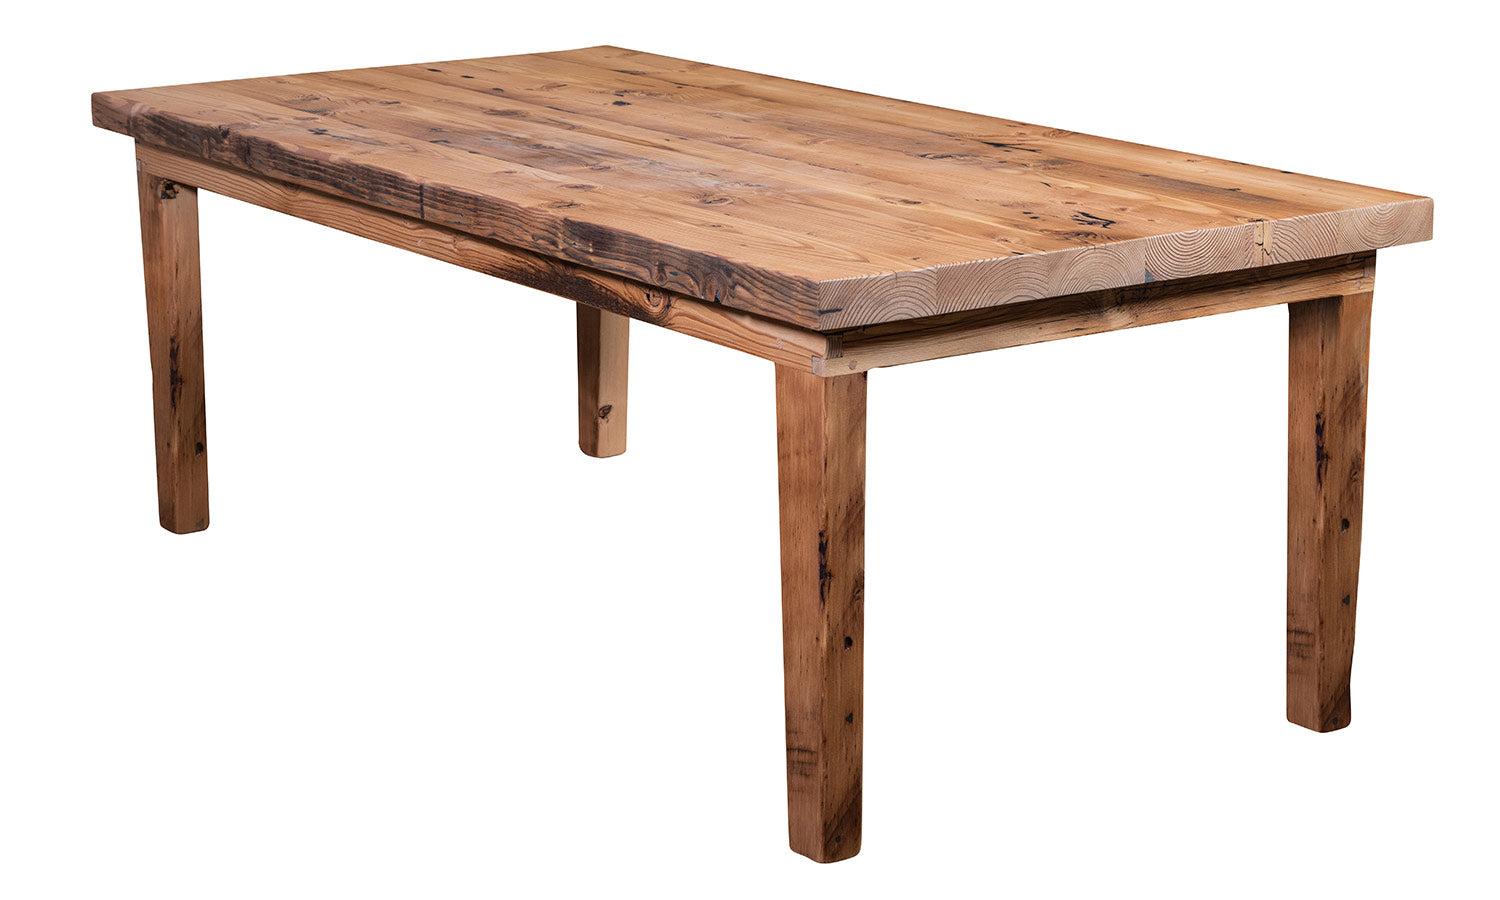 Old London Recycled Timber Wood 100 yr old Baltic Pine Solid Wood Dining Table Perth WA